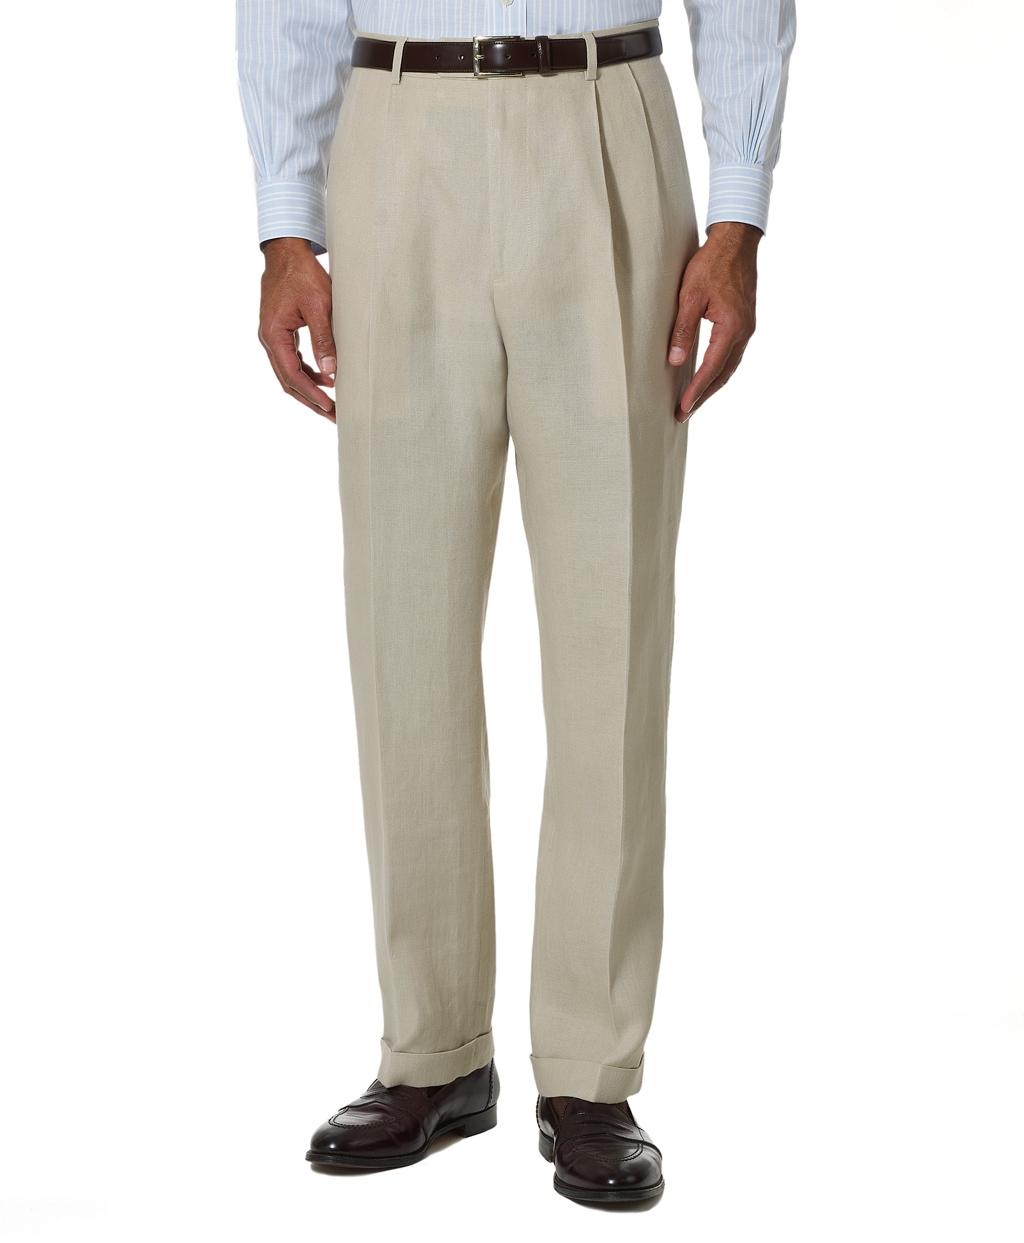 Lyst - Brooks Brothers Irish Linen Pleat-front Trousers in Natural for Men